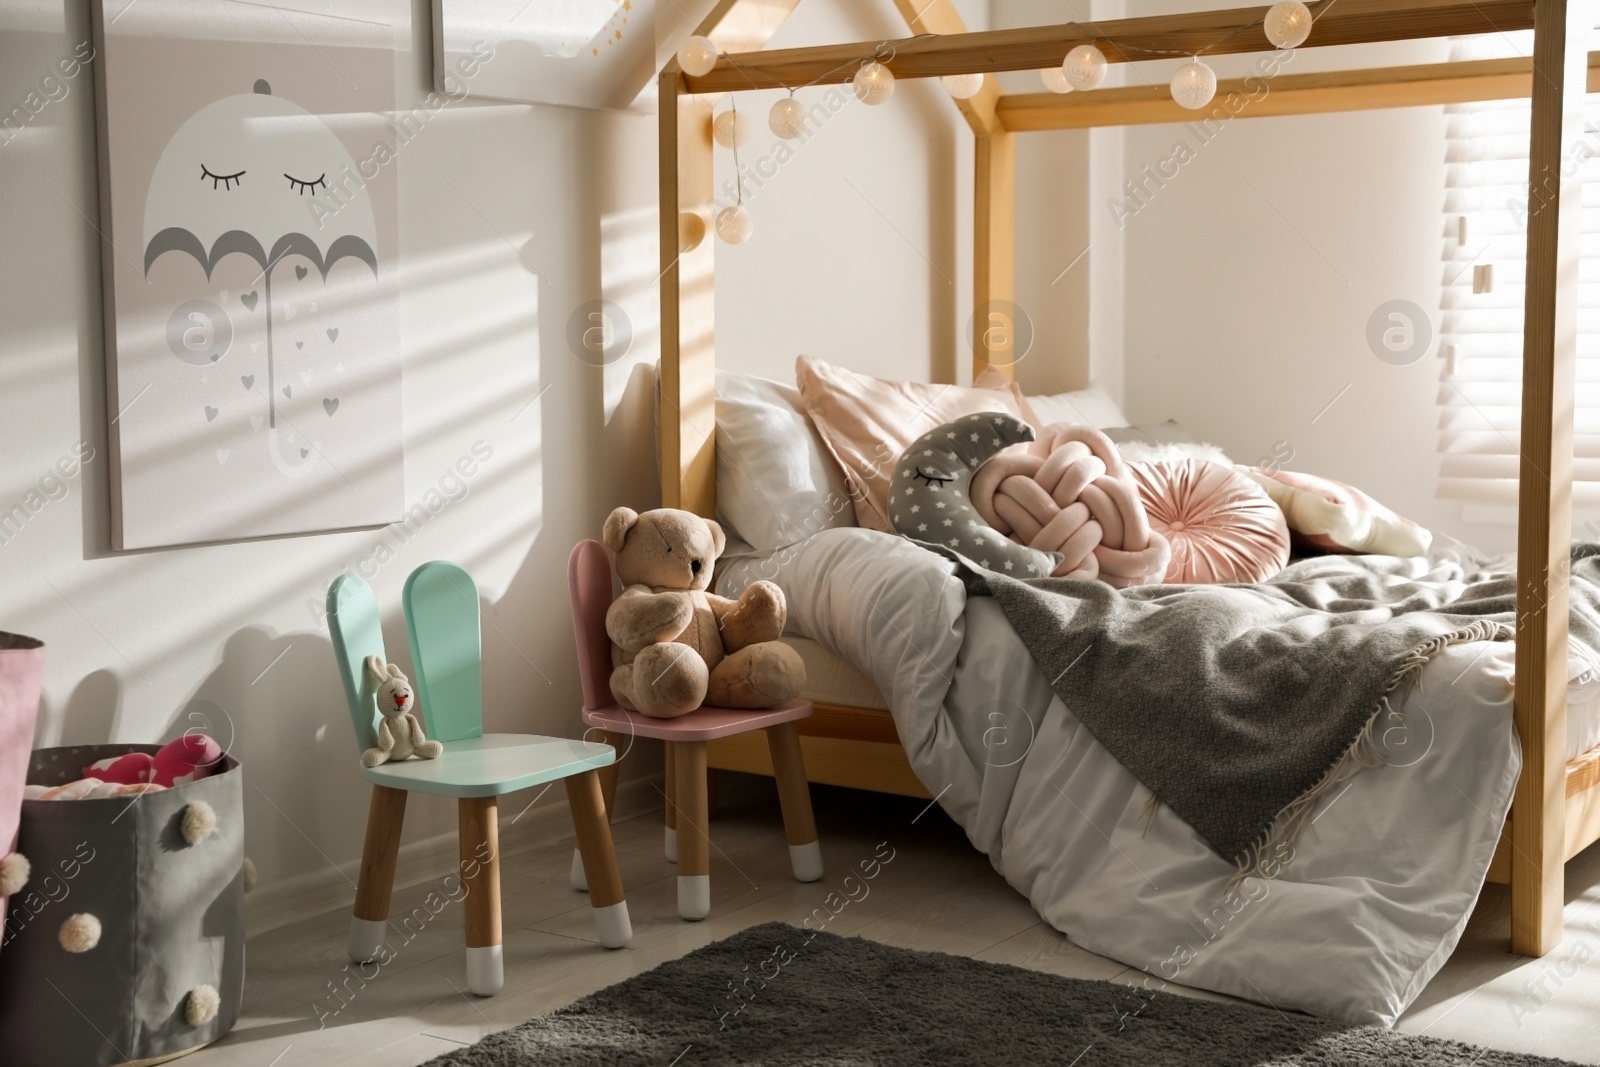 Photo of Cute chairs with bunny ears in children's bedroom interior